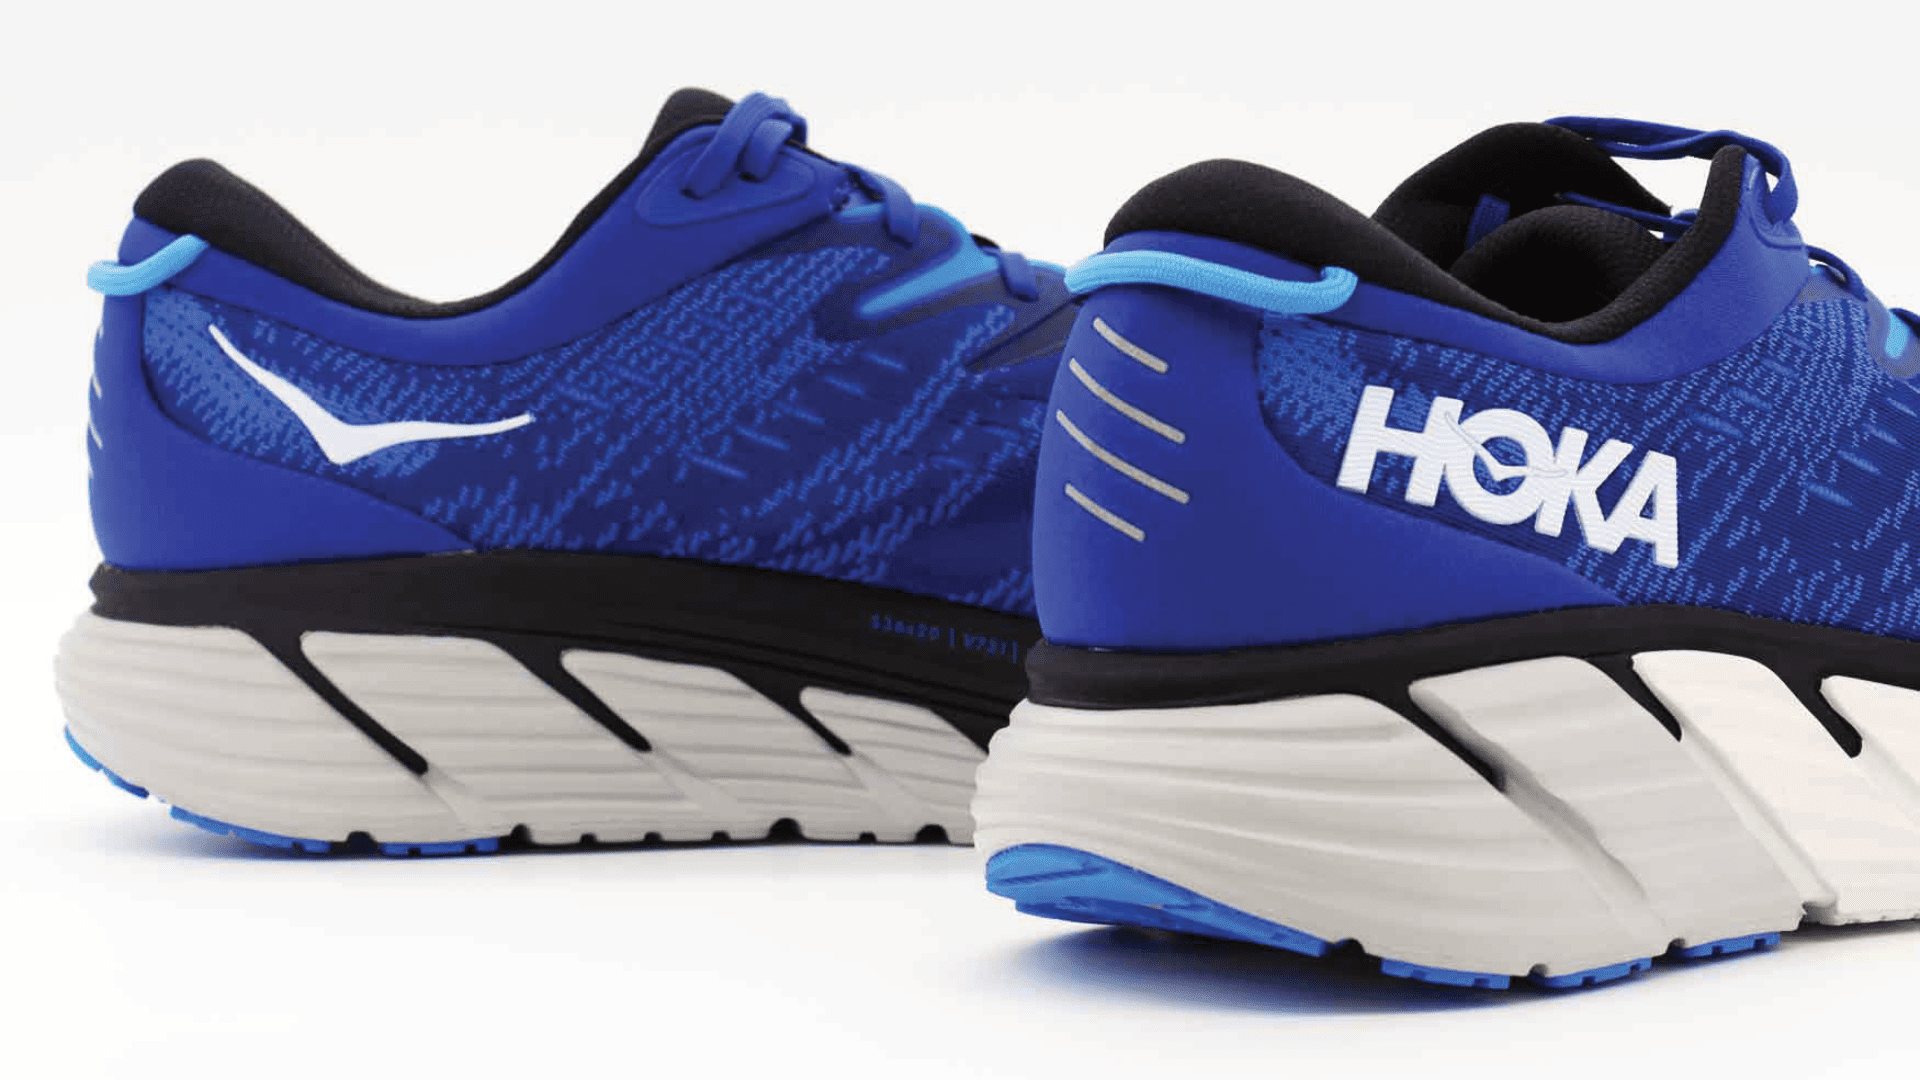 "A pair of blue Hoka Gaviota 4 shoes, known for their comfort and ability to alleviate symptoms of Morton's neuroma, a condition affecting the nerves between the toes.